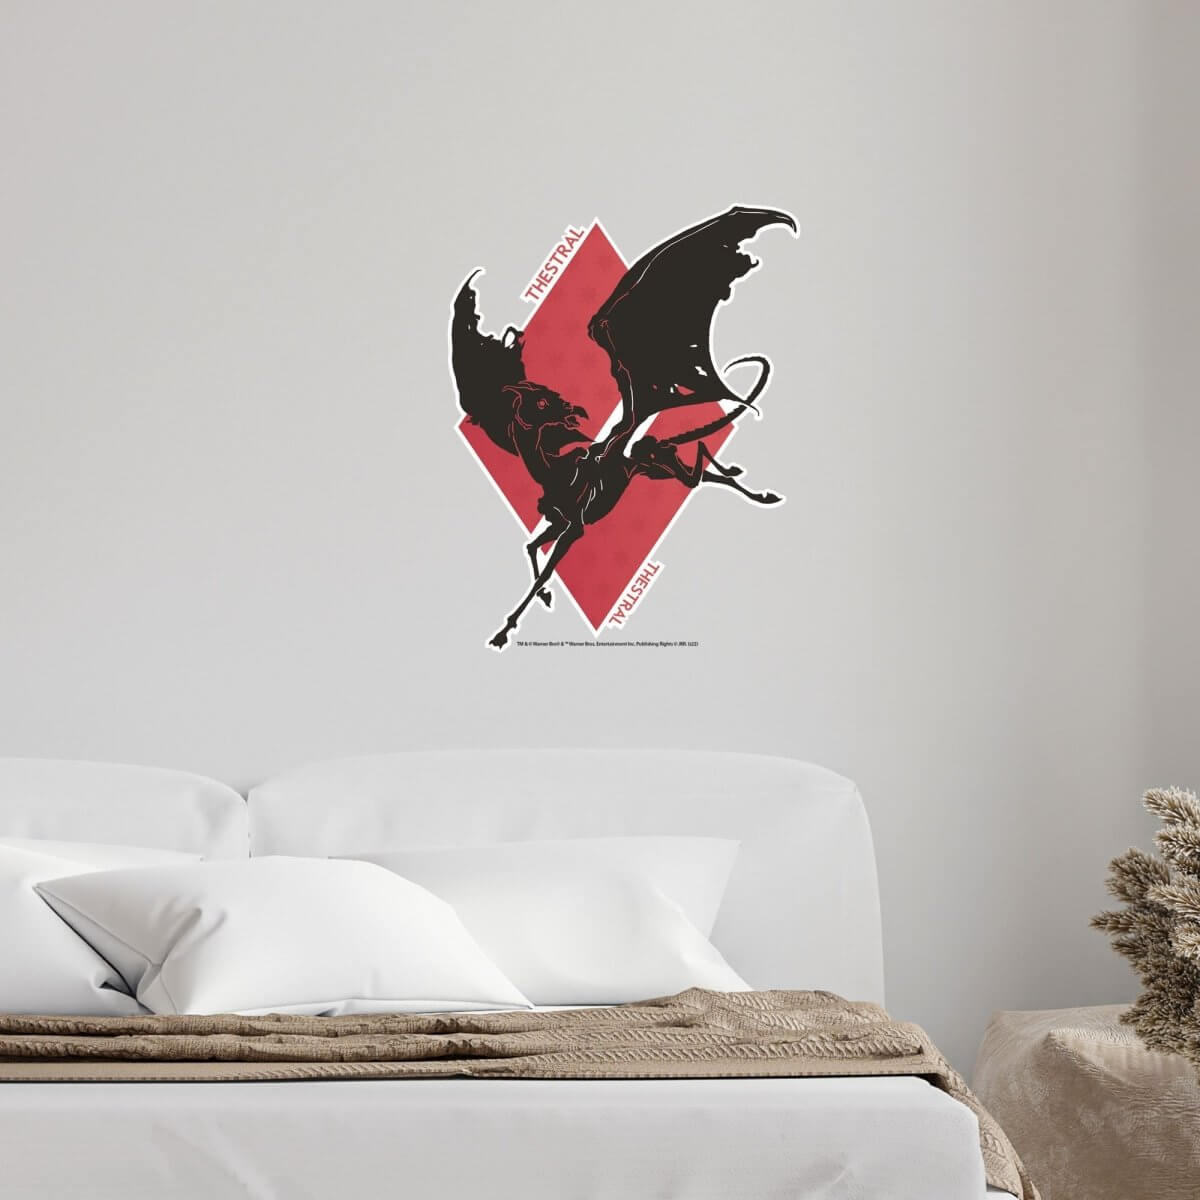 Kismet Decals Harry Potter Thestral Licensed Wall Sticker - Easy DIY Home & Kids Room Decor Wall Decal Art - Kismet Decals